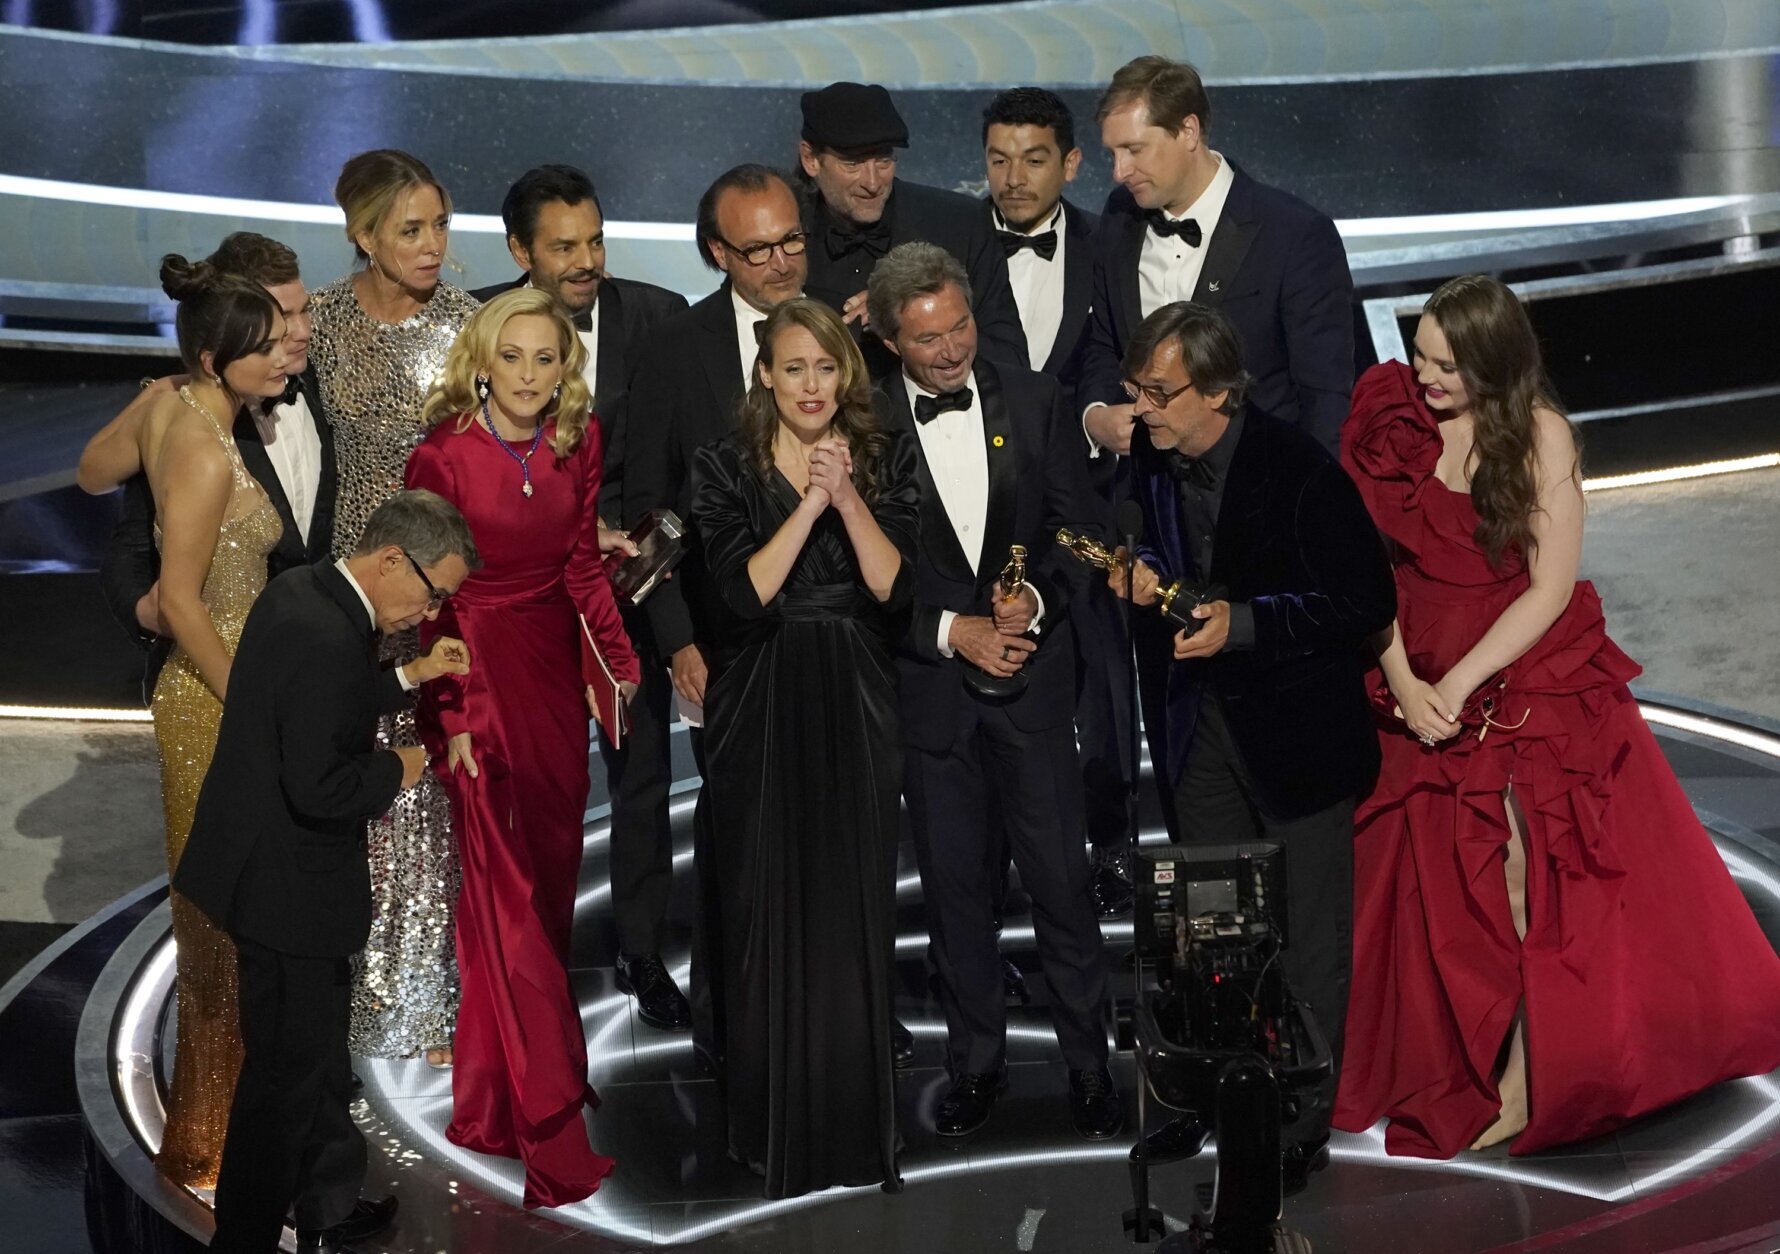 The cast and crew of "CODA" accept the award for best picture at the Oscars on Sunday, March 27, 2022, at the Dolby Theatre in Los Angeles. (AP Photo/Chris Pizzello)